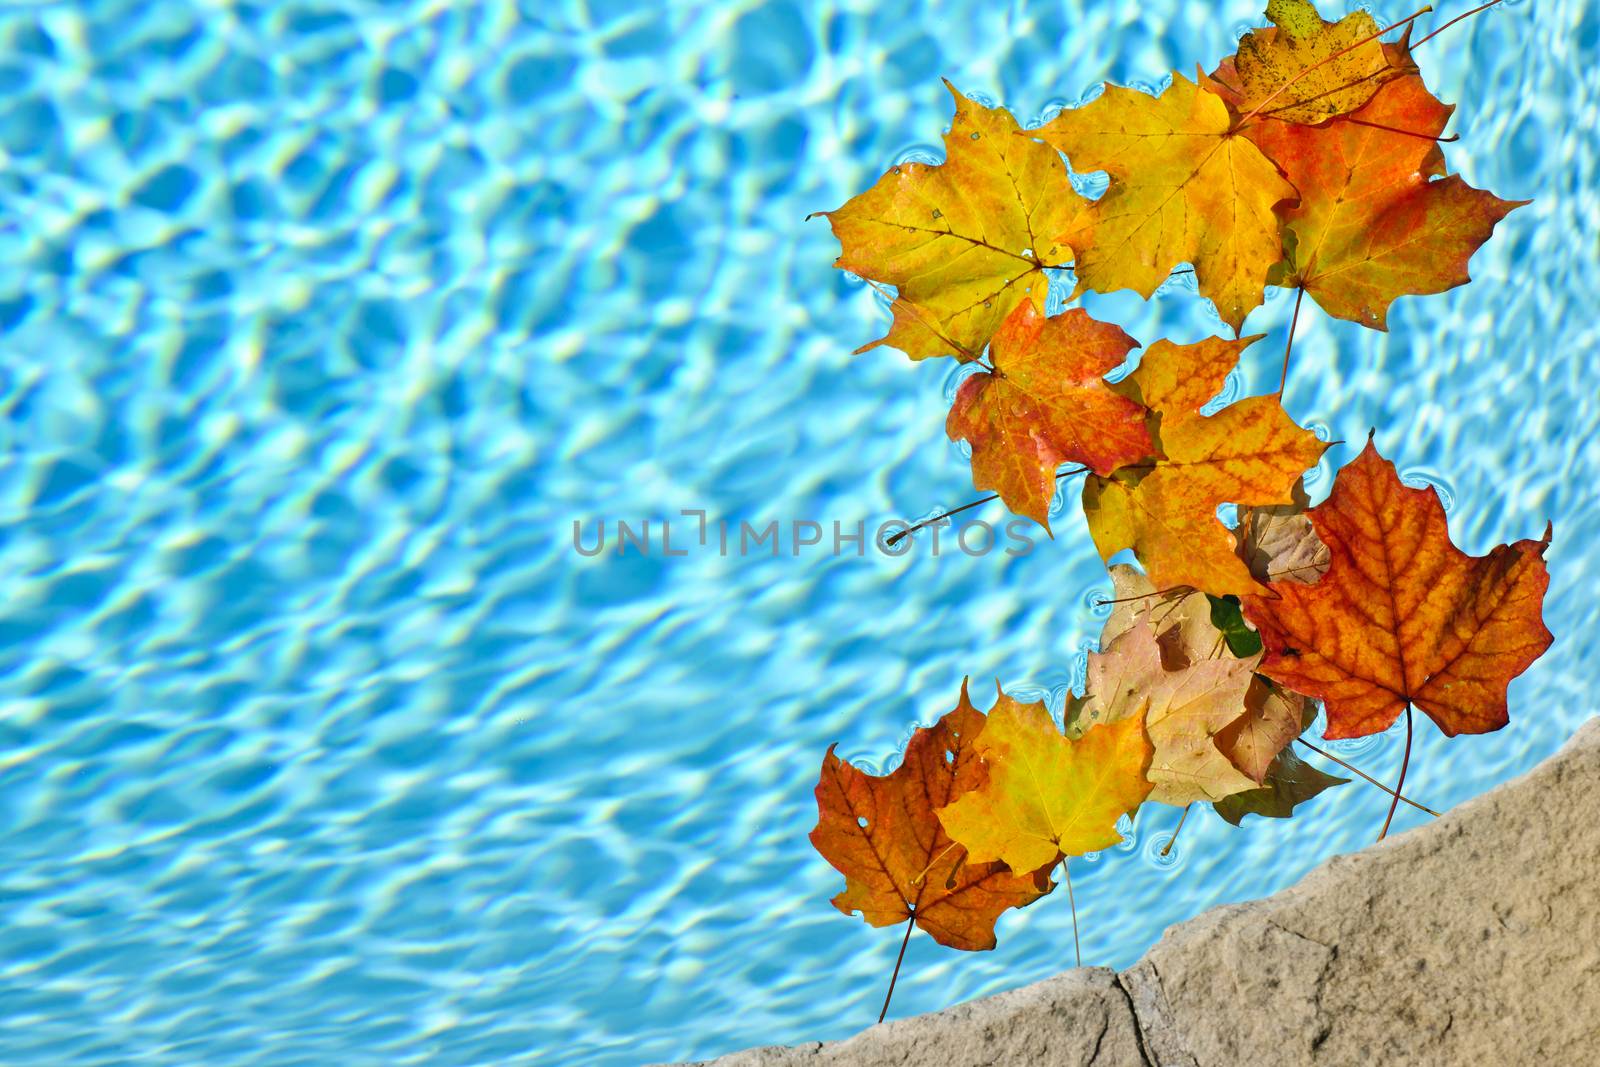 Fall leaves floating in pool by elenathewise